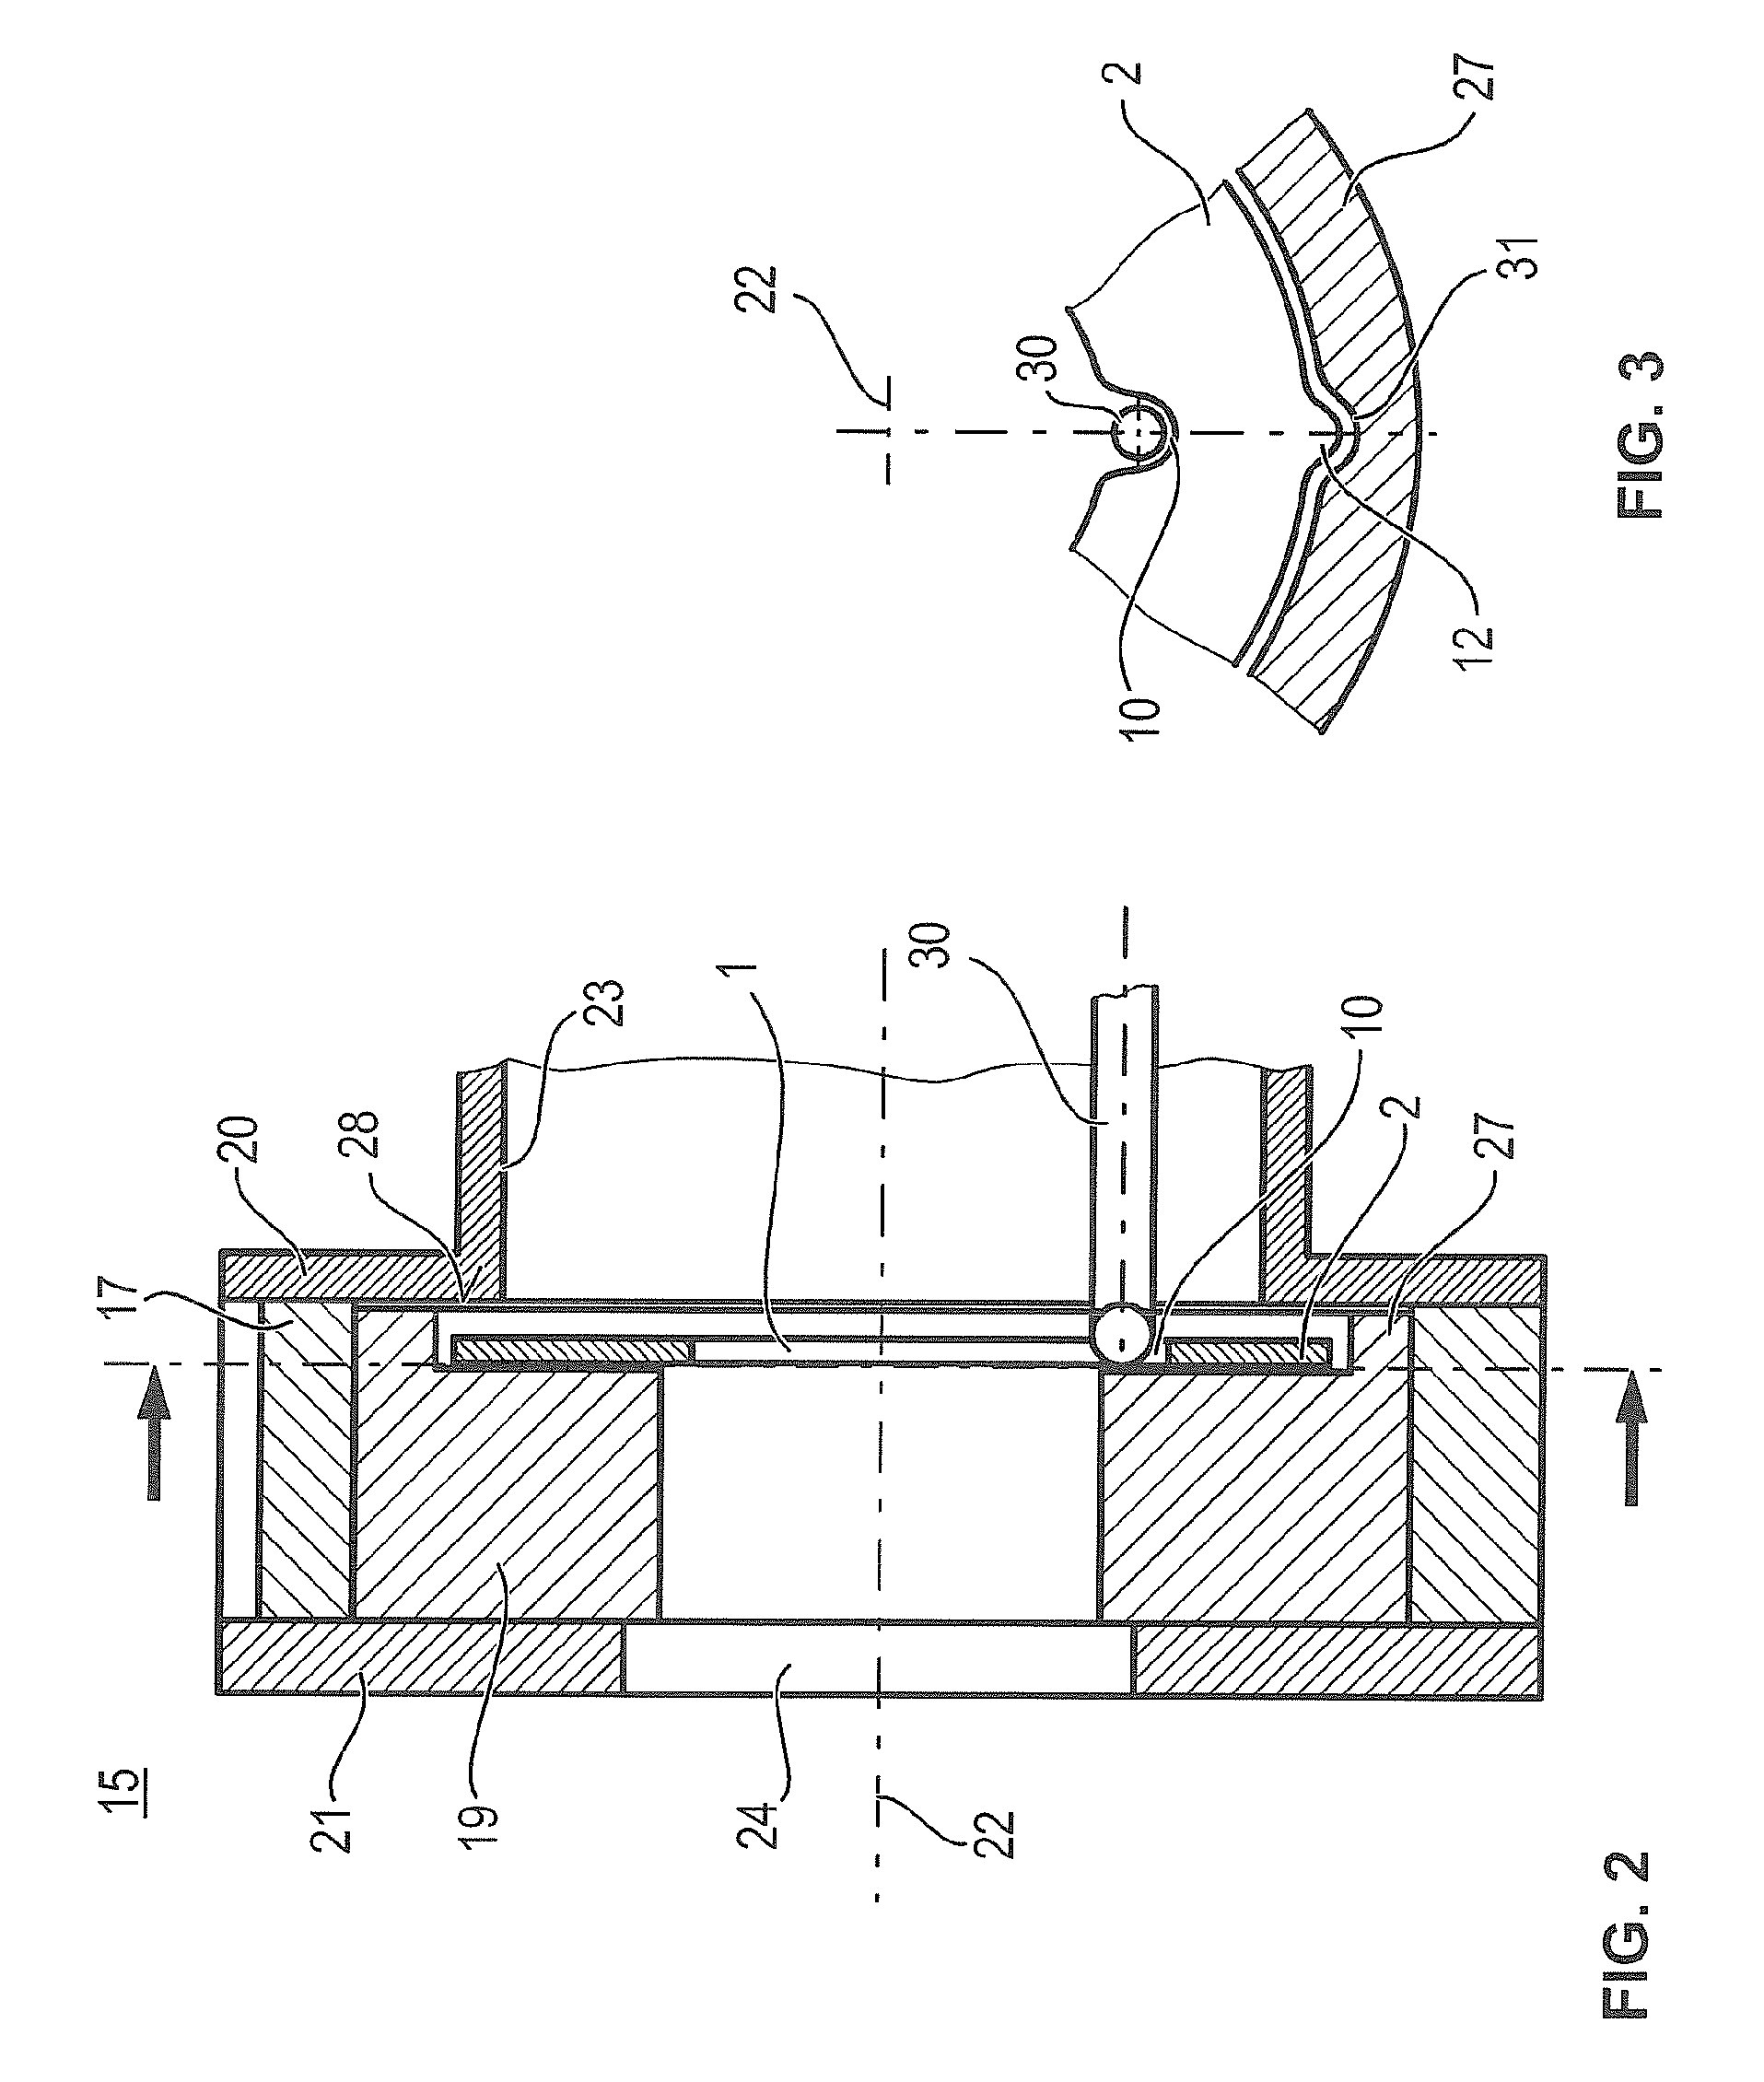 Clamping disk and cam adjusting unit